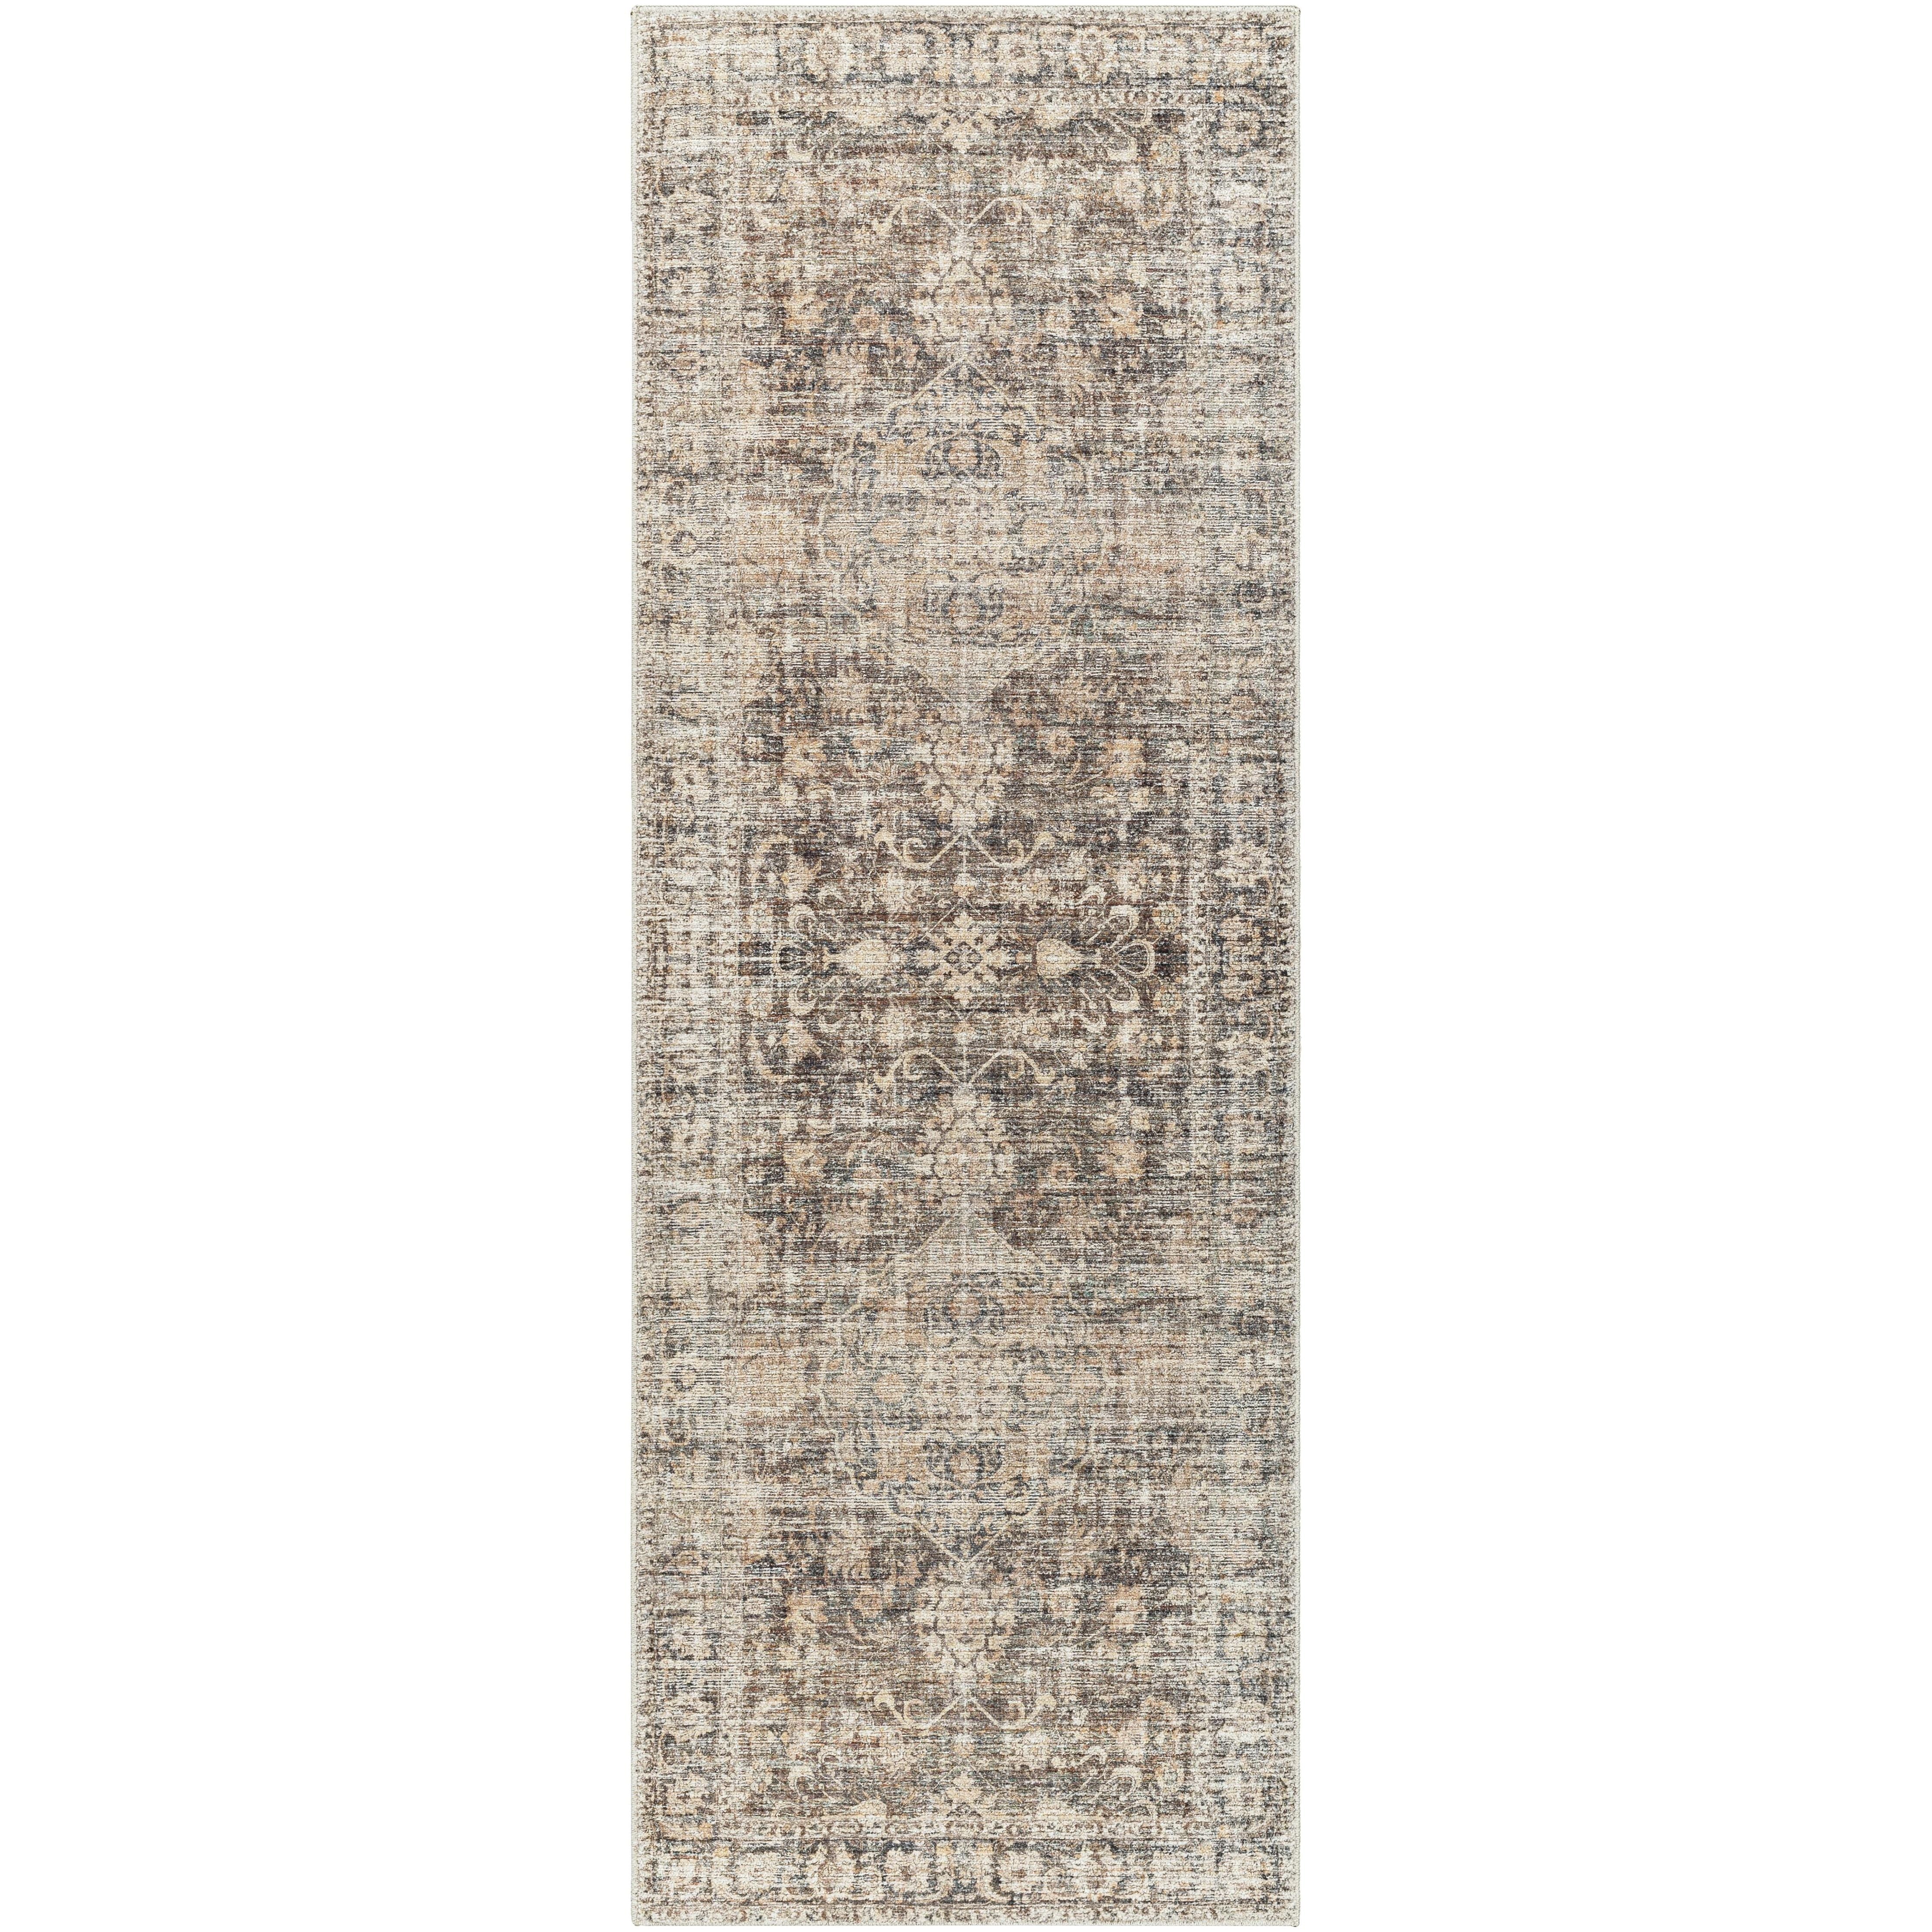 The Marlene area rug is a stunning collaboration between Surya and Becki Owens, designed to bring a touch of elegance to any space. This gorgeous rug features a subtle medallion pattern in perfect neutral colors, making it a versatile piece that will easily elevate the atmosphere of any room. Amethyst Home provides interior design, new home construction design consulting, vintage area rugs, and lighting in the Monterey metro area.